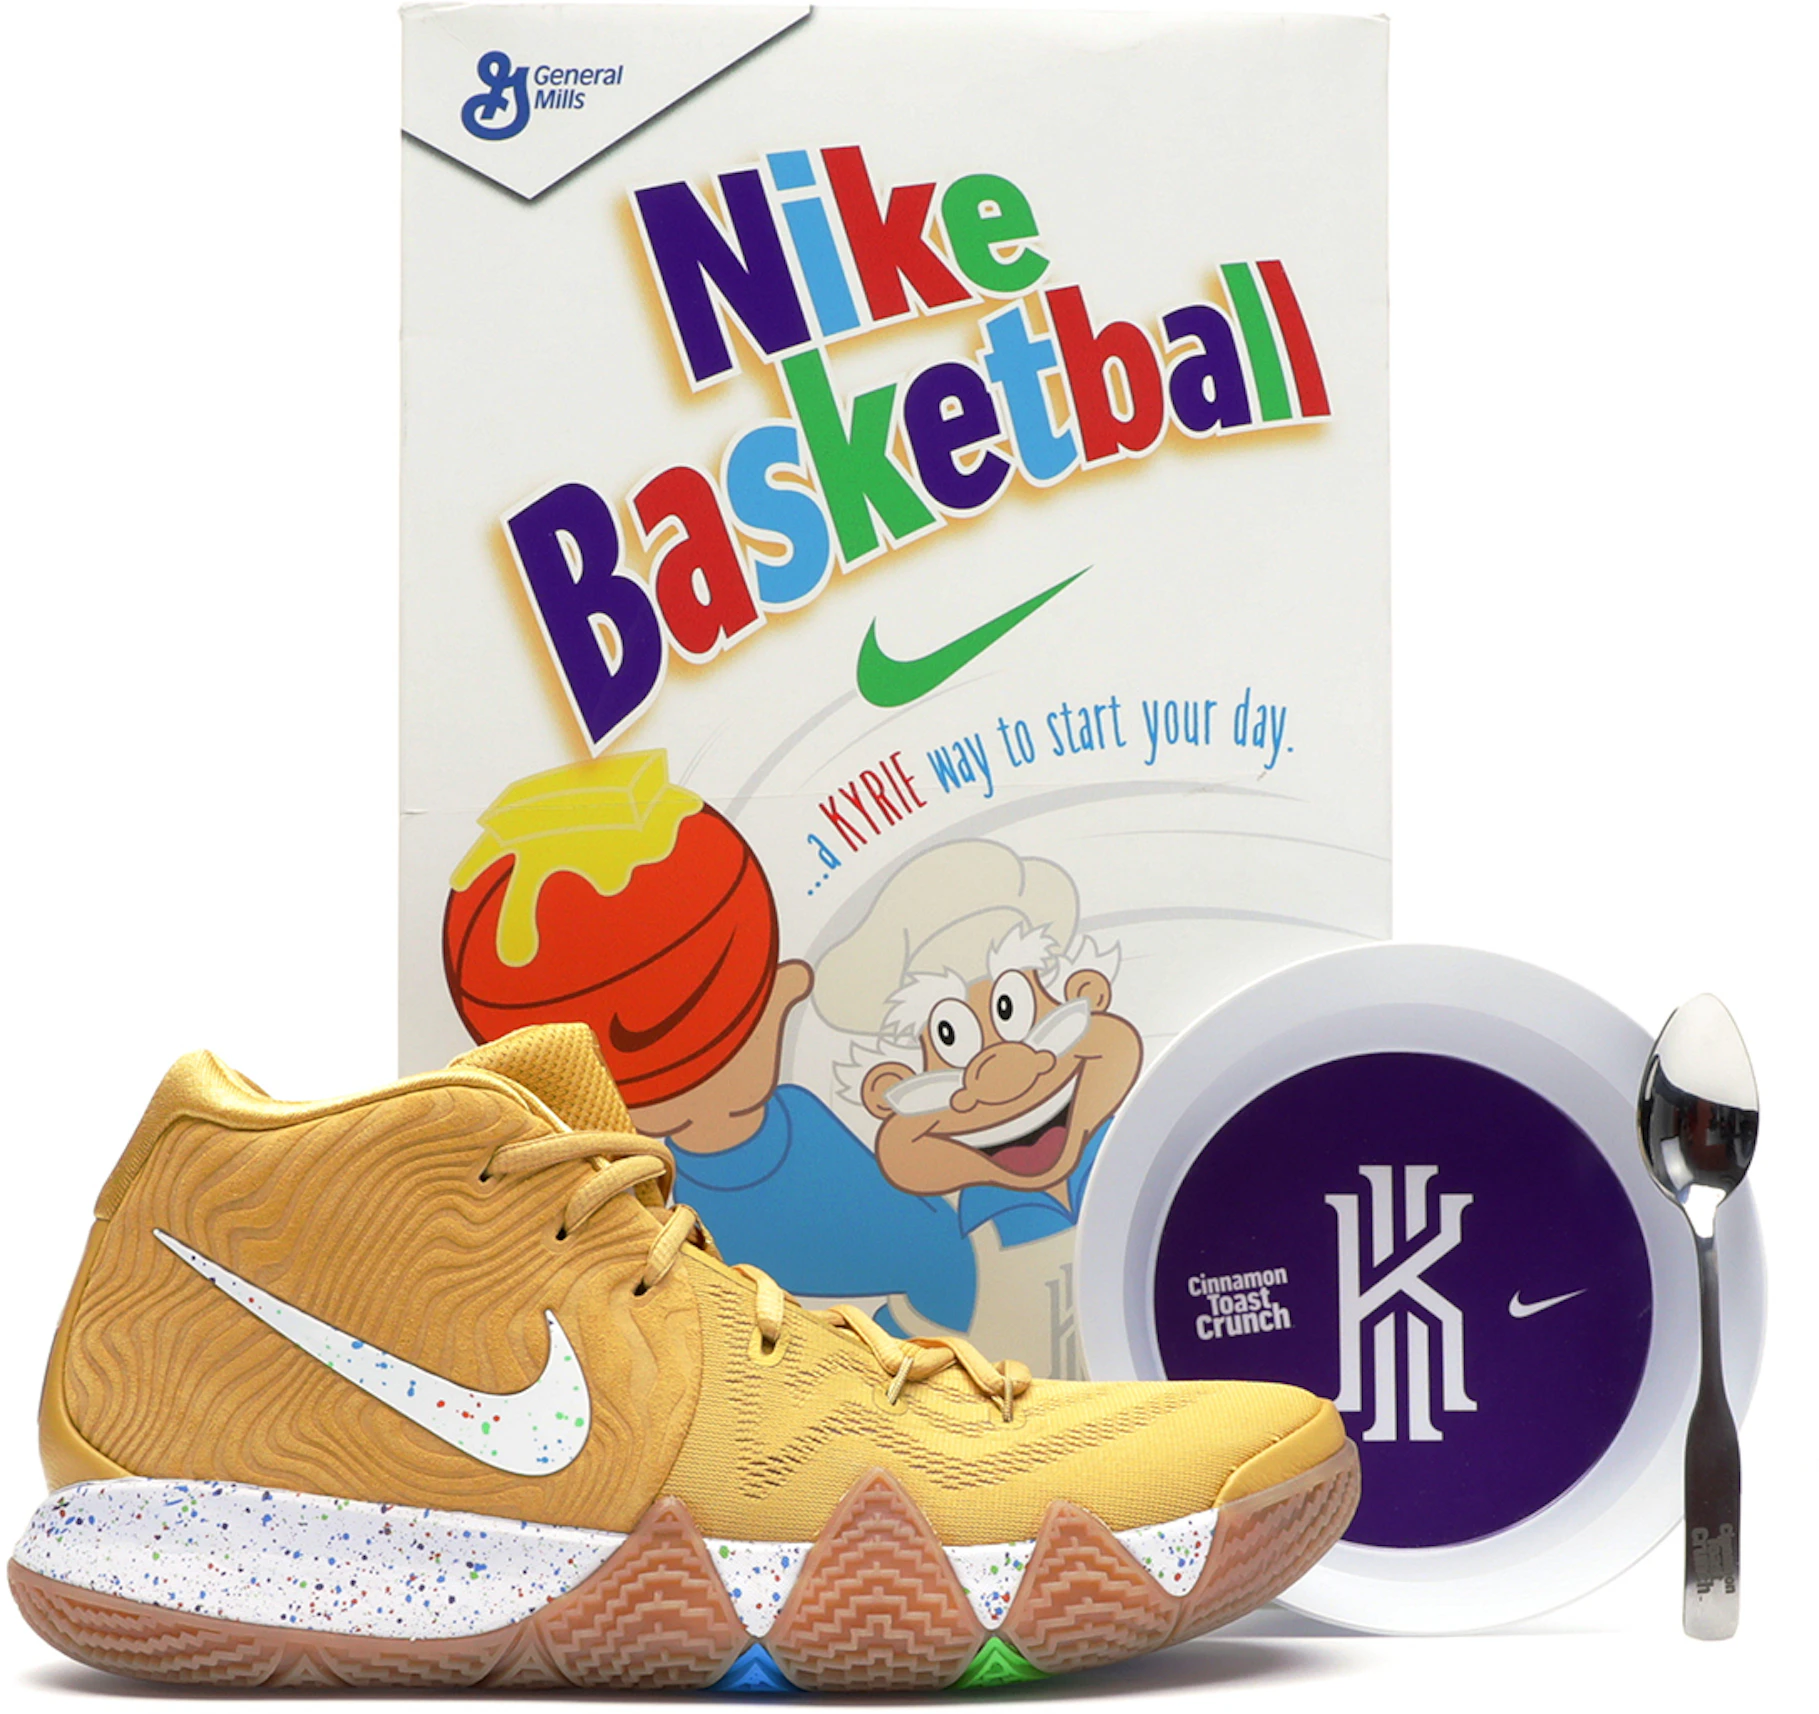 Nike Kyrie 4 Cinnamon Toast Crunch (Special Cereal Box Package) -  BV0426-900 - GB